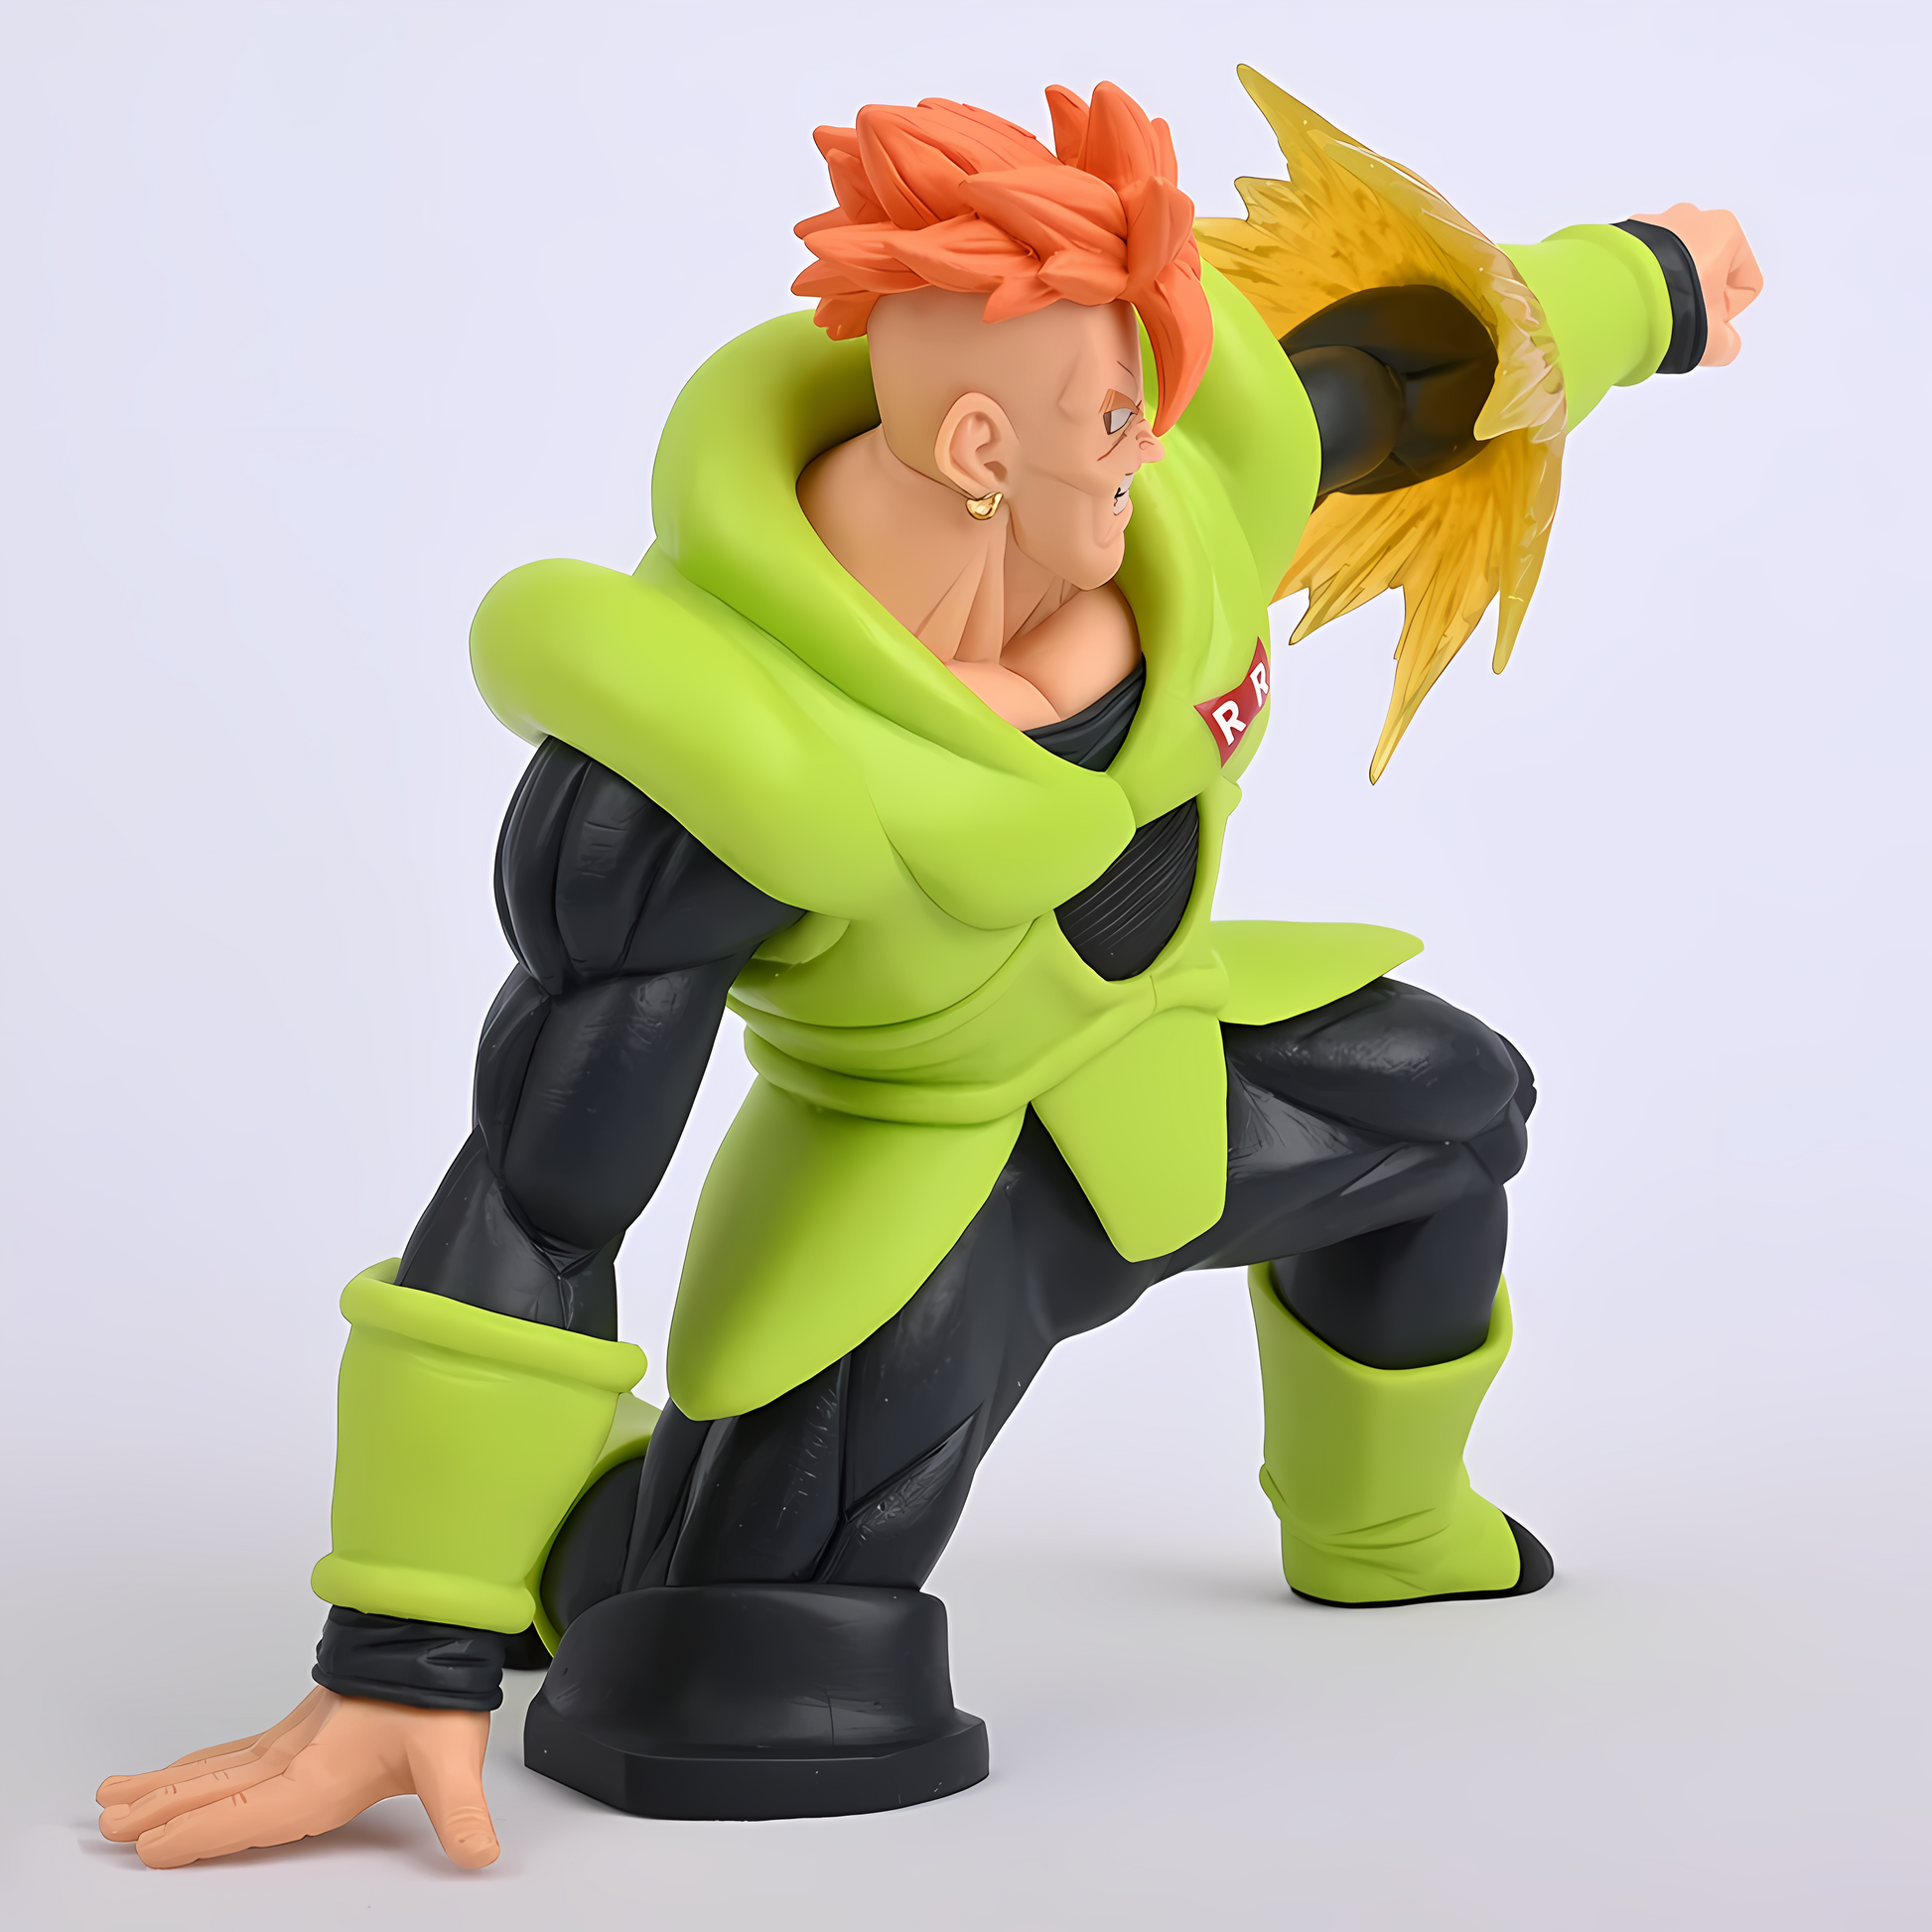 Three-quarter view of Android 16's collectible figure, highlighting his side profile, mechanical orange hair, and energy effect, all reflecting his enigmatic warrior essence.